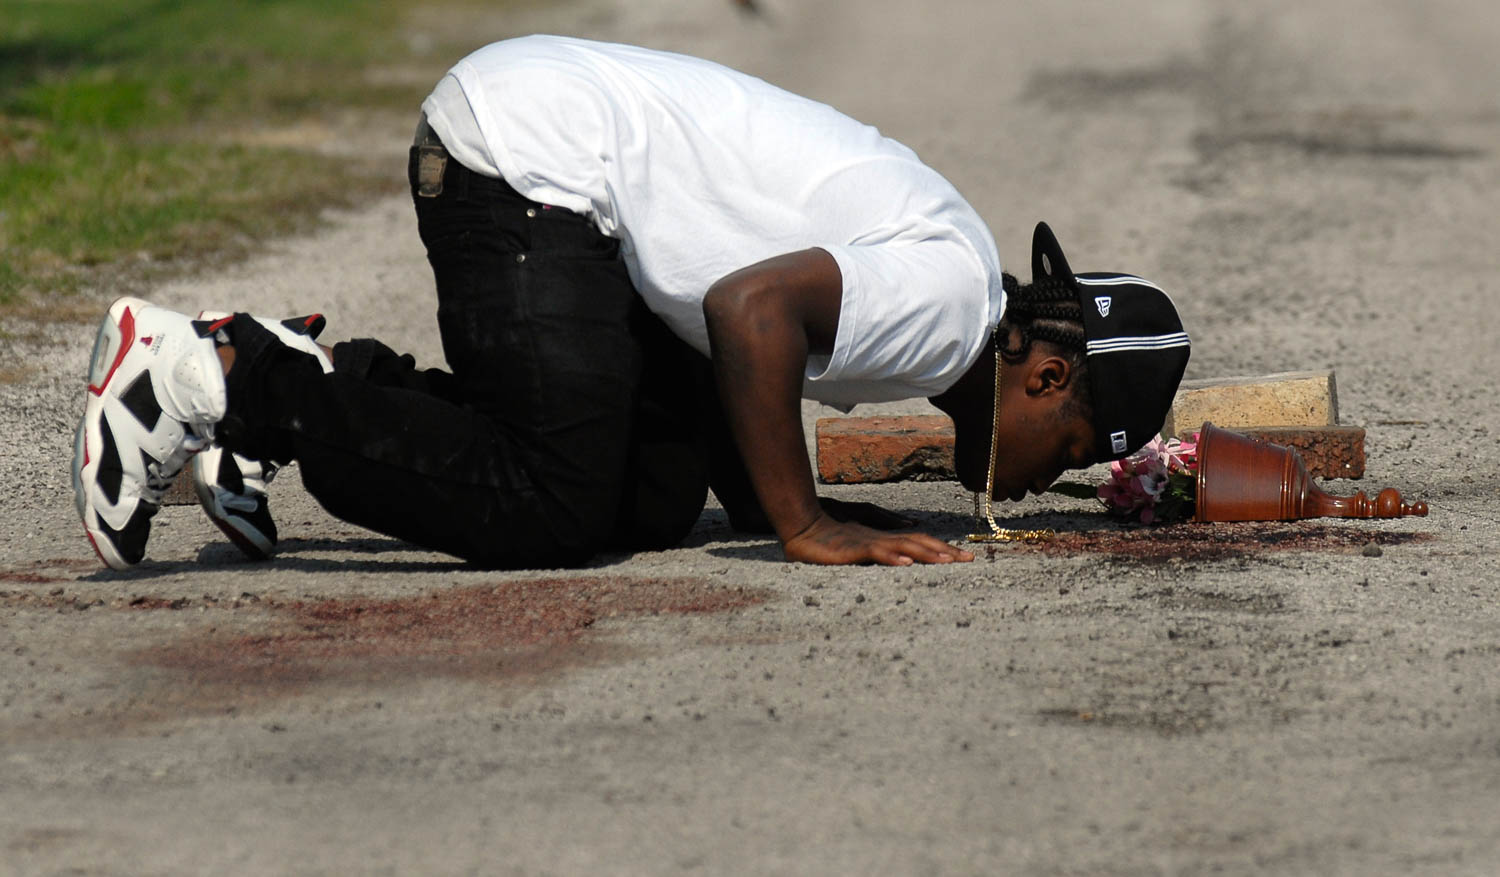 Joe Williams of Carbon Cliff kisses the blood-stained pavement Thursday morning in the East Moline Ill. alley where his cousin Kelton Trice was shot and killed by police Wednesday evening. Police investigators said Trice was killed during an exchange of gunfire with East Moline police officer Sgt. Tom Peterson. (Todd Mizener - Dispatch/Argus)